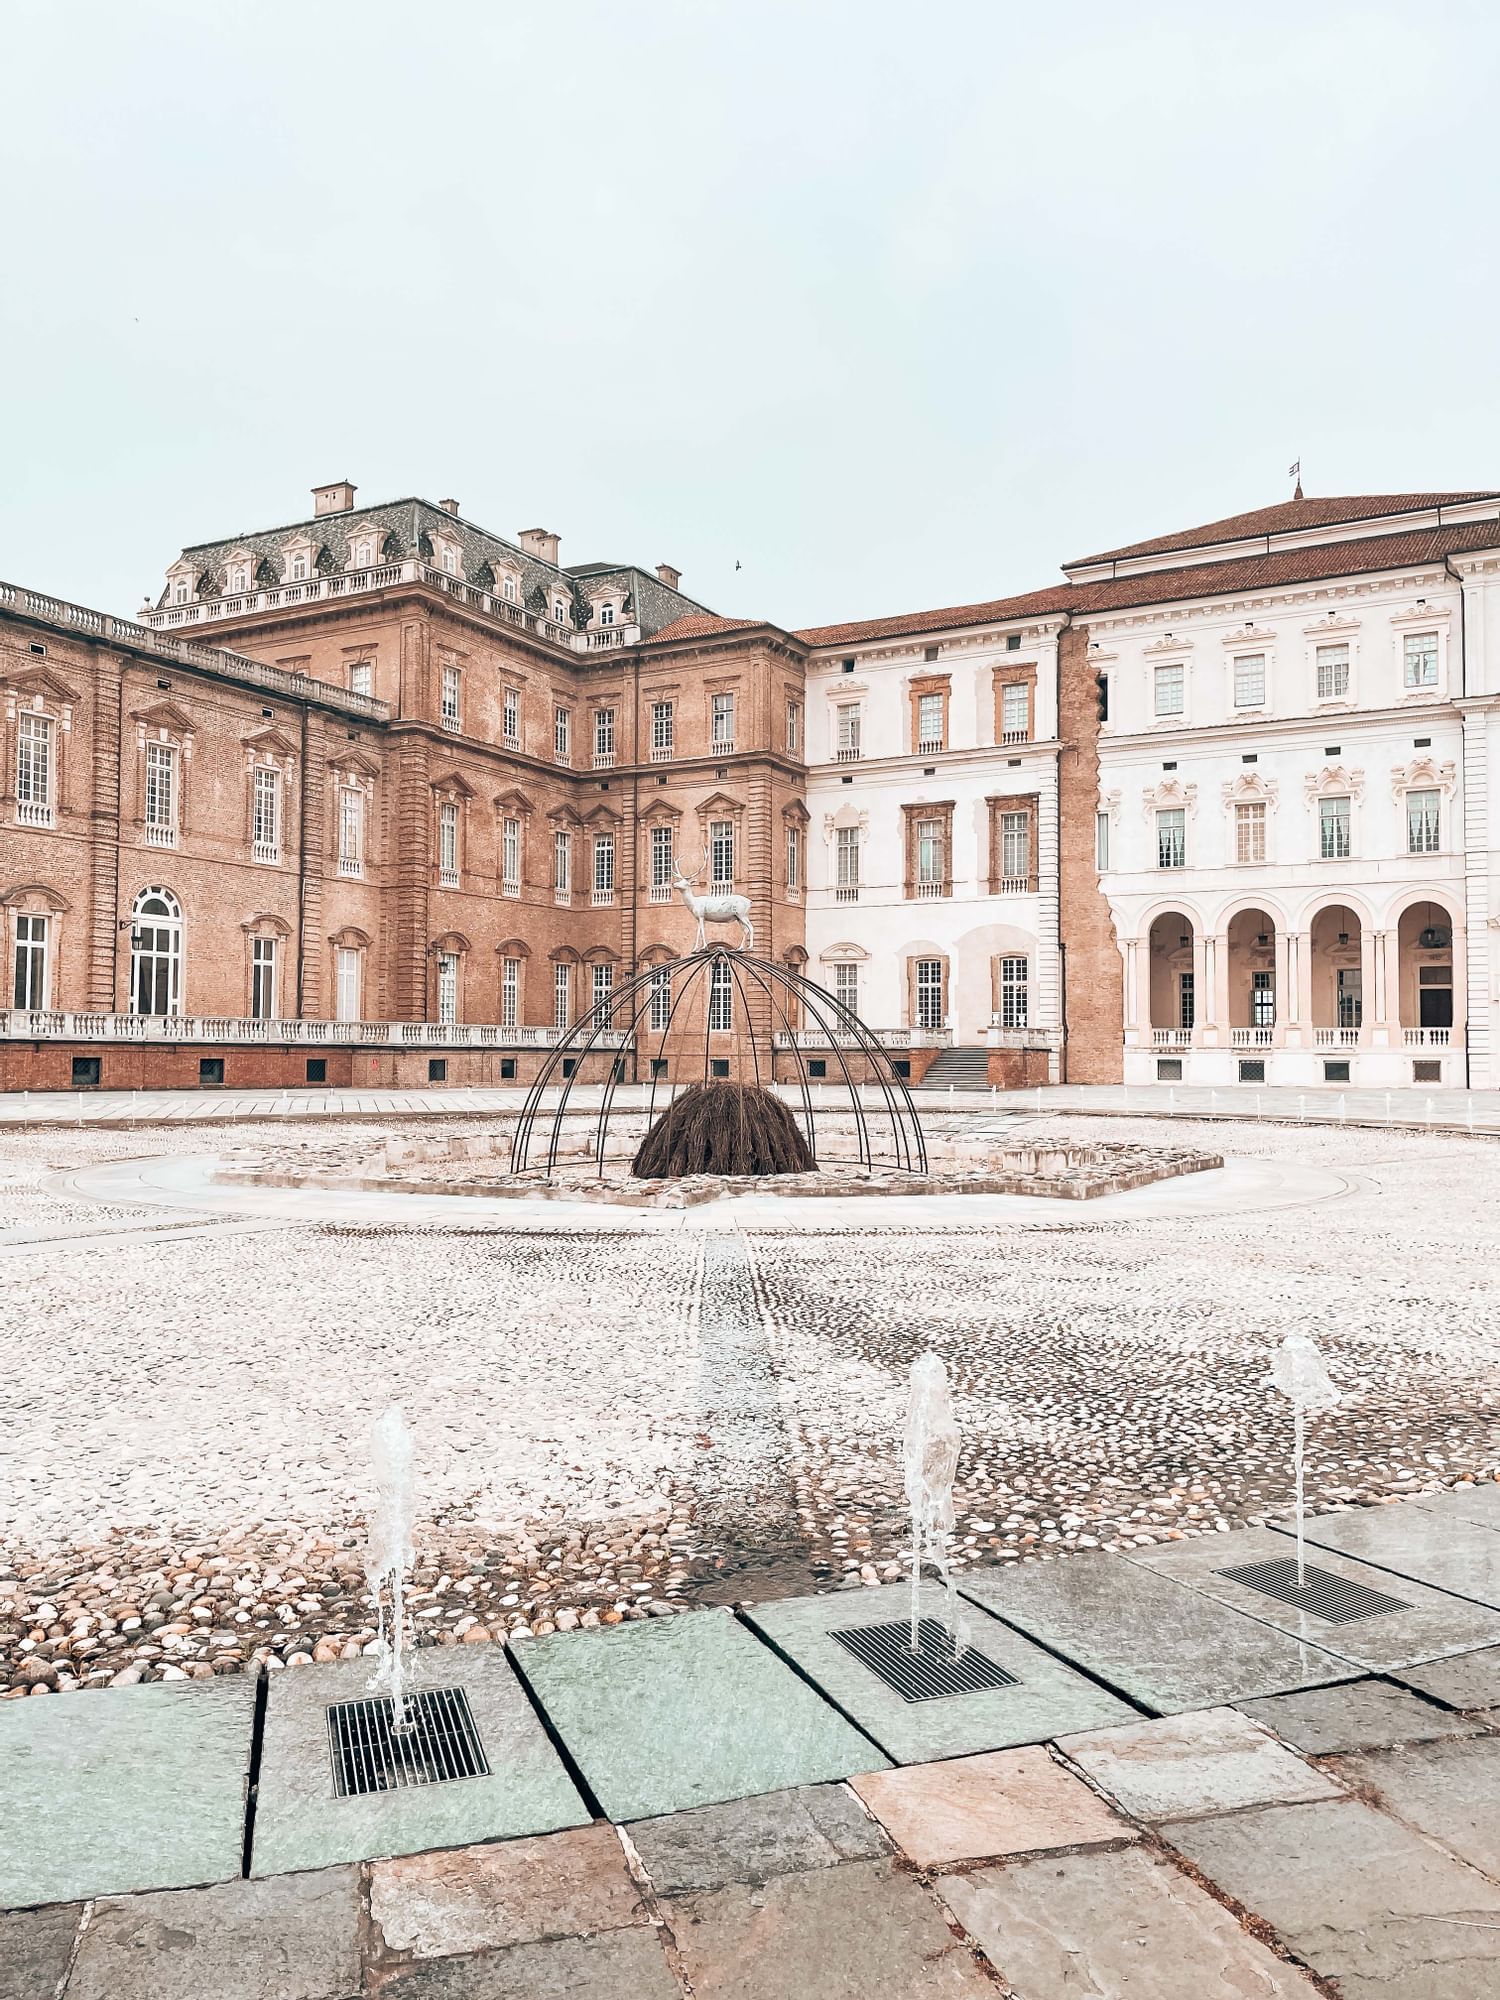 Visiting the Palace of Venaria Reale in Turin